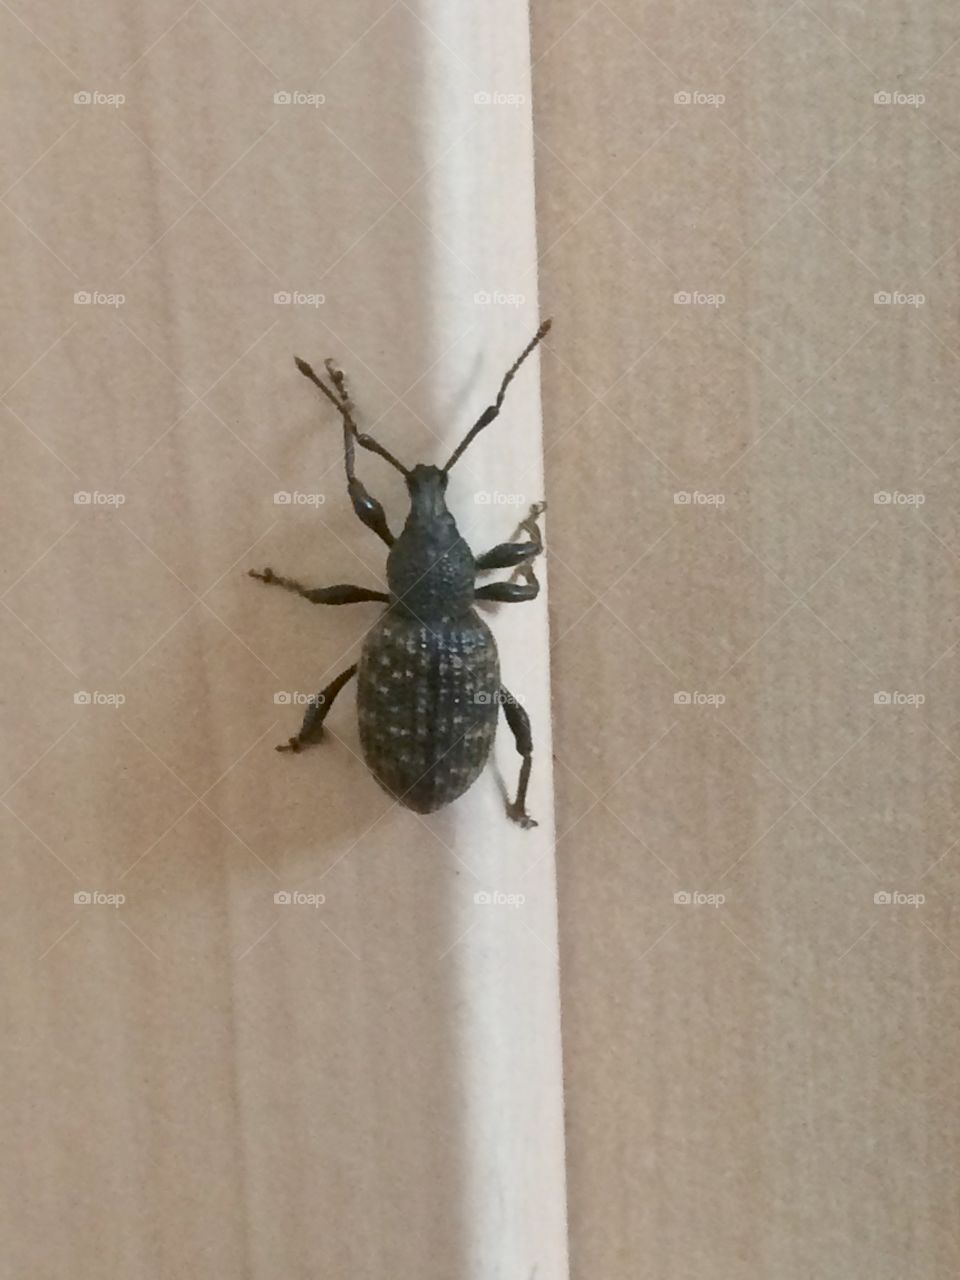 Beetle in kitchen 